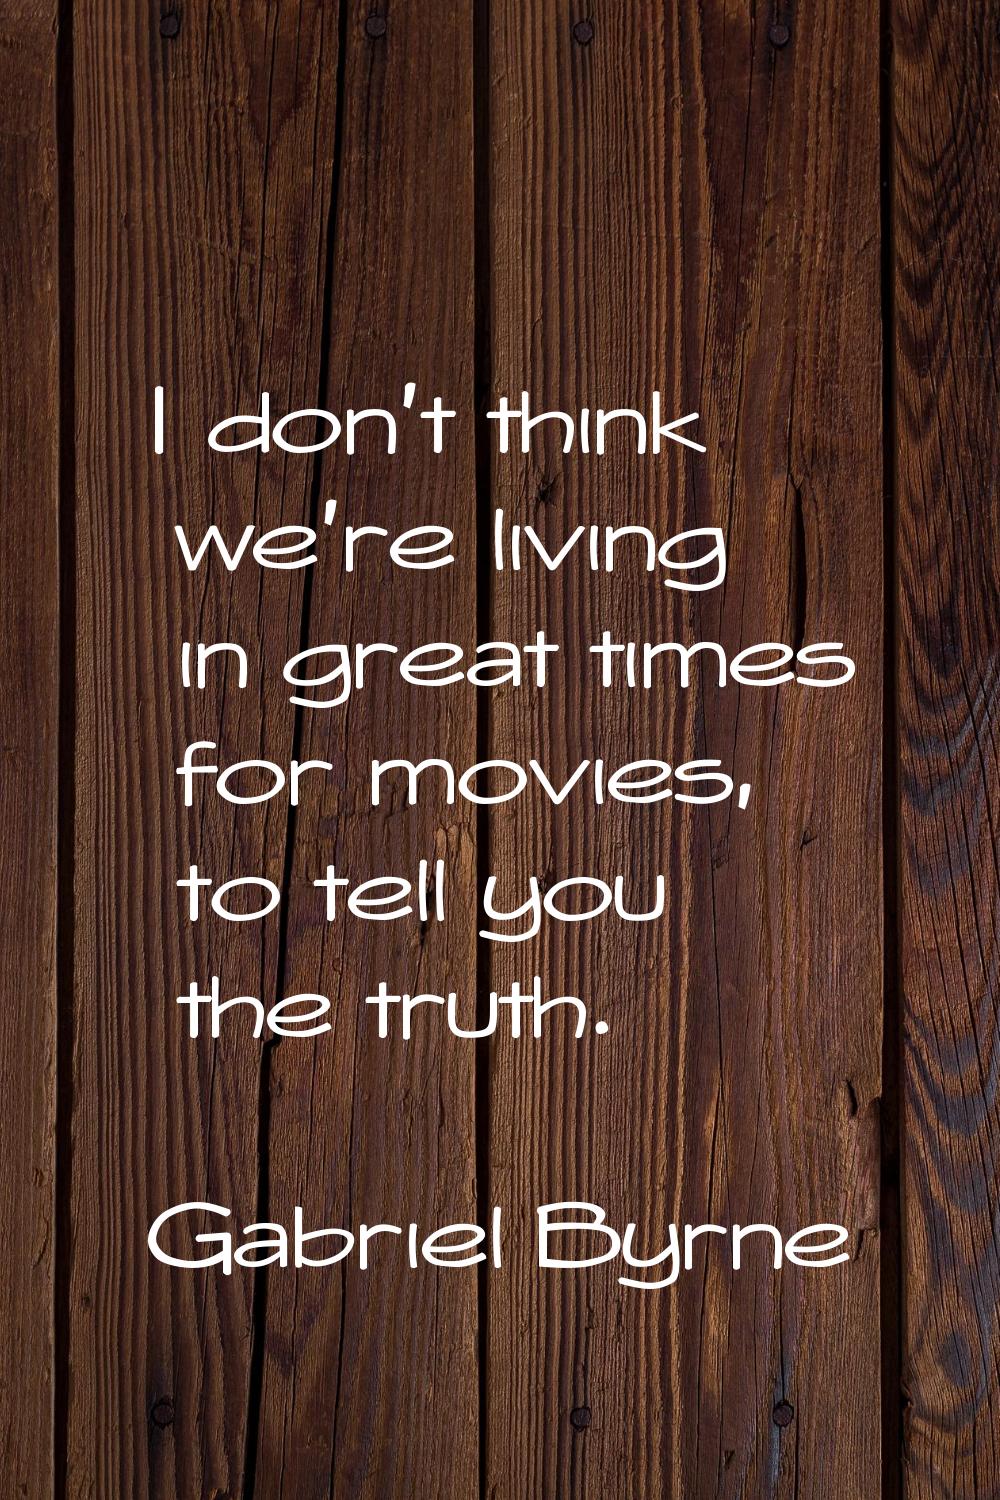 I don't think we're living in great times for movies, to tell you the truth.